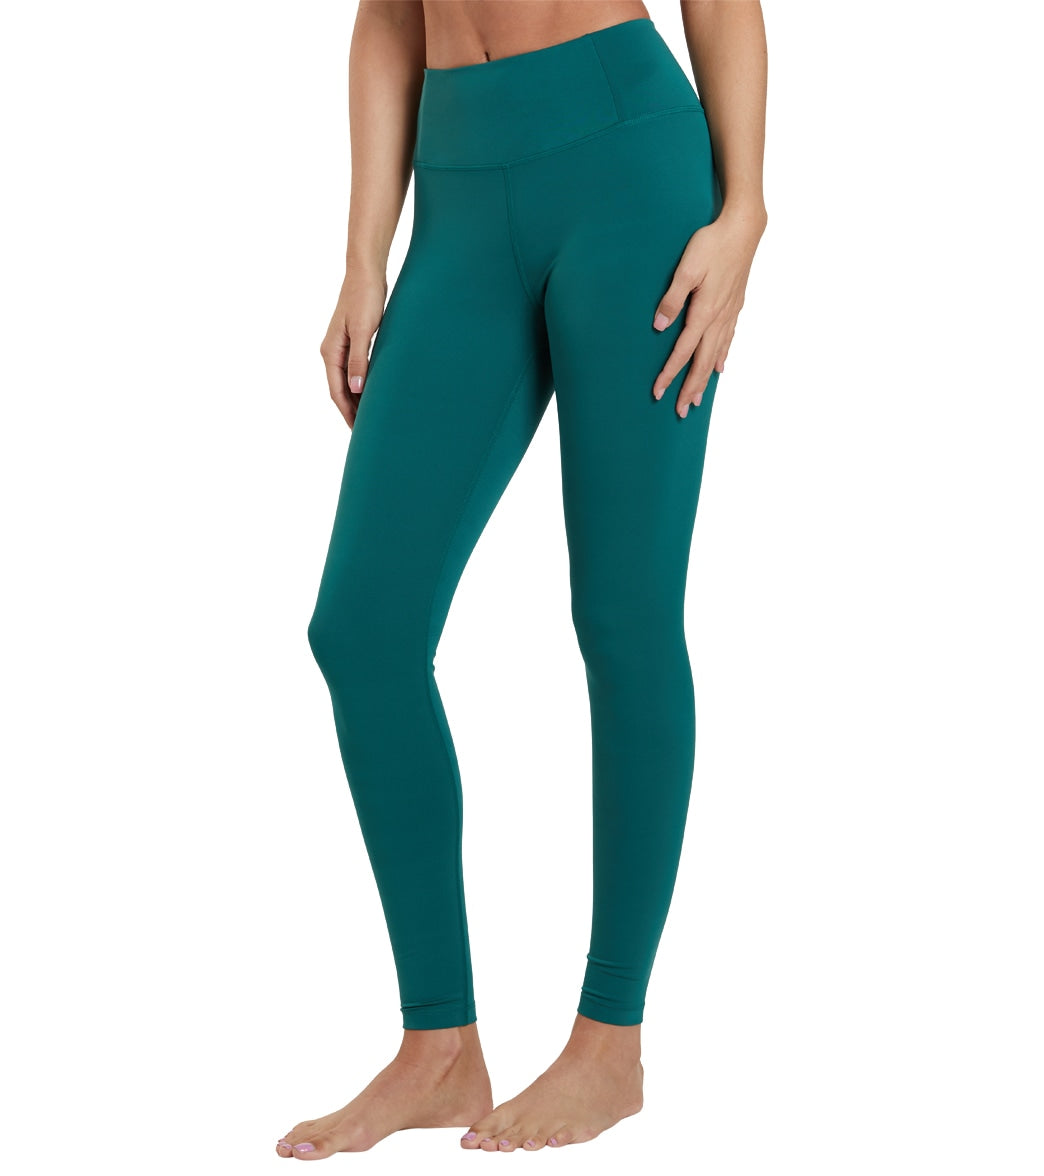 Girlfriend Collective + Biome FLOAT High-Rise Legging